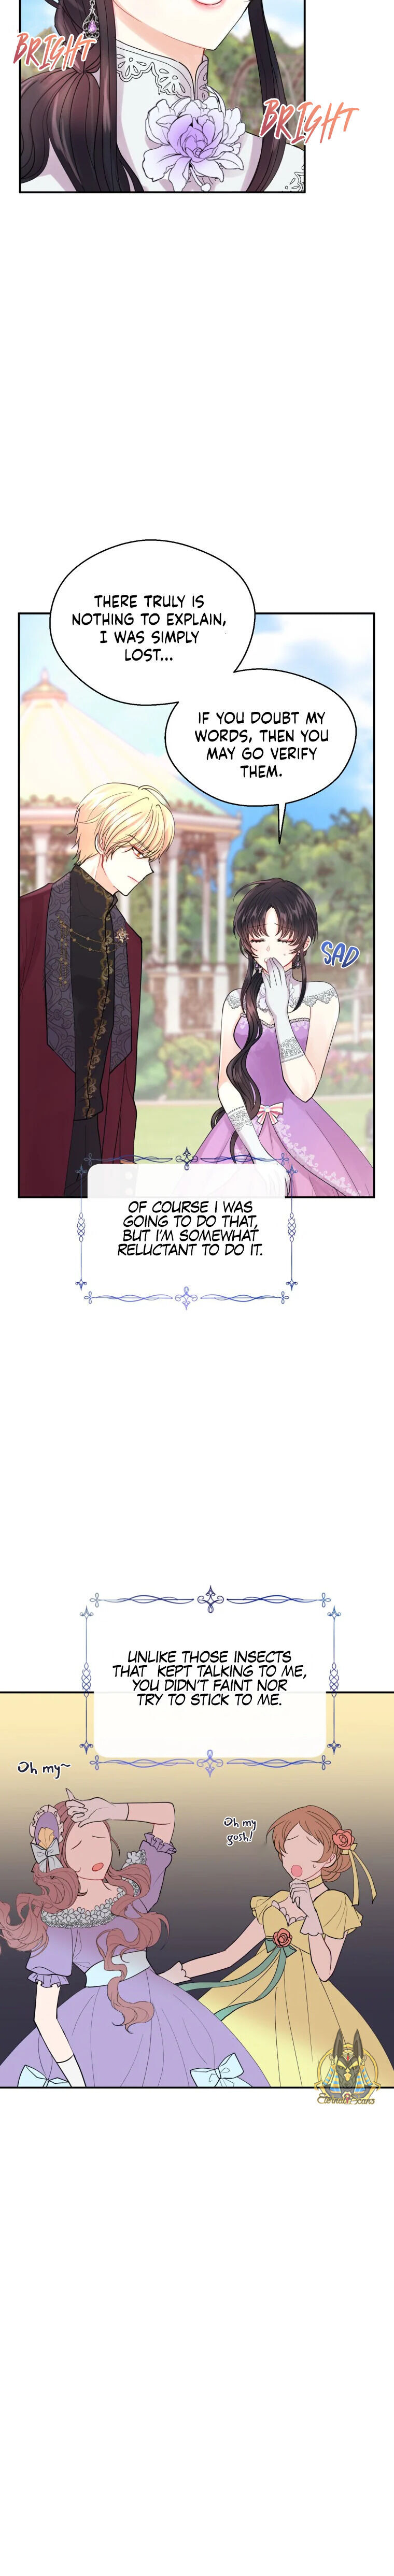 Roelin Walks the Future Chapter 3 - Page 8